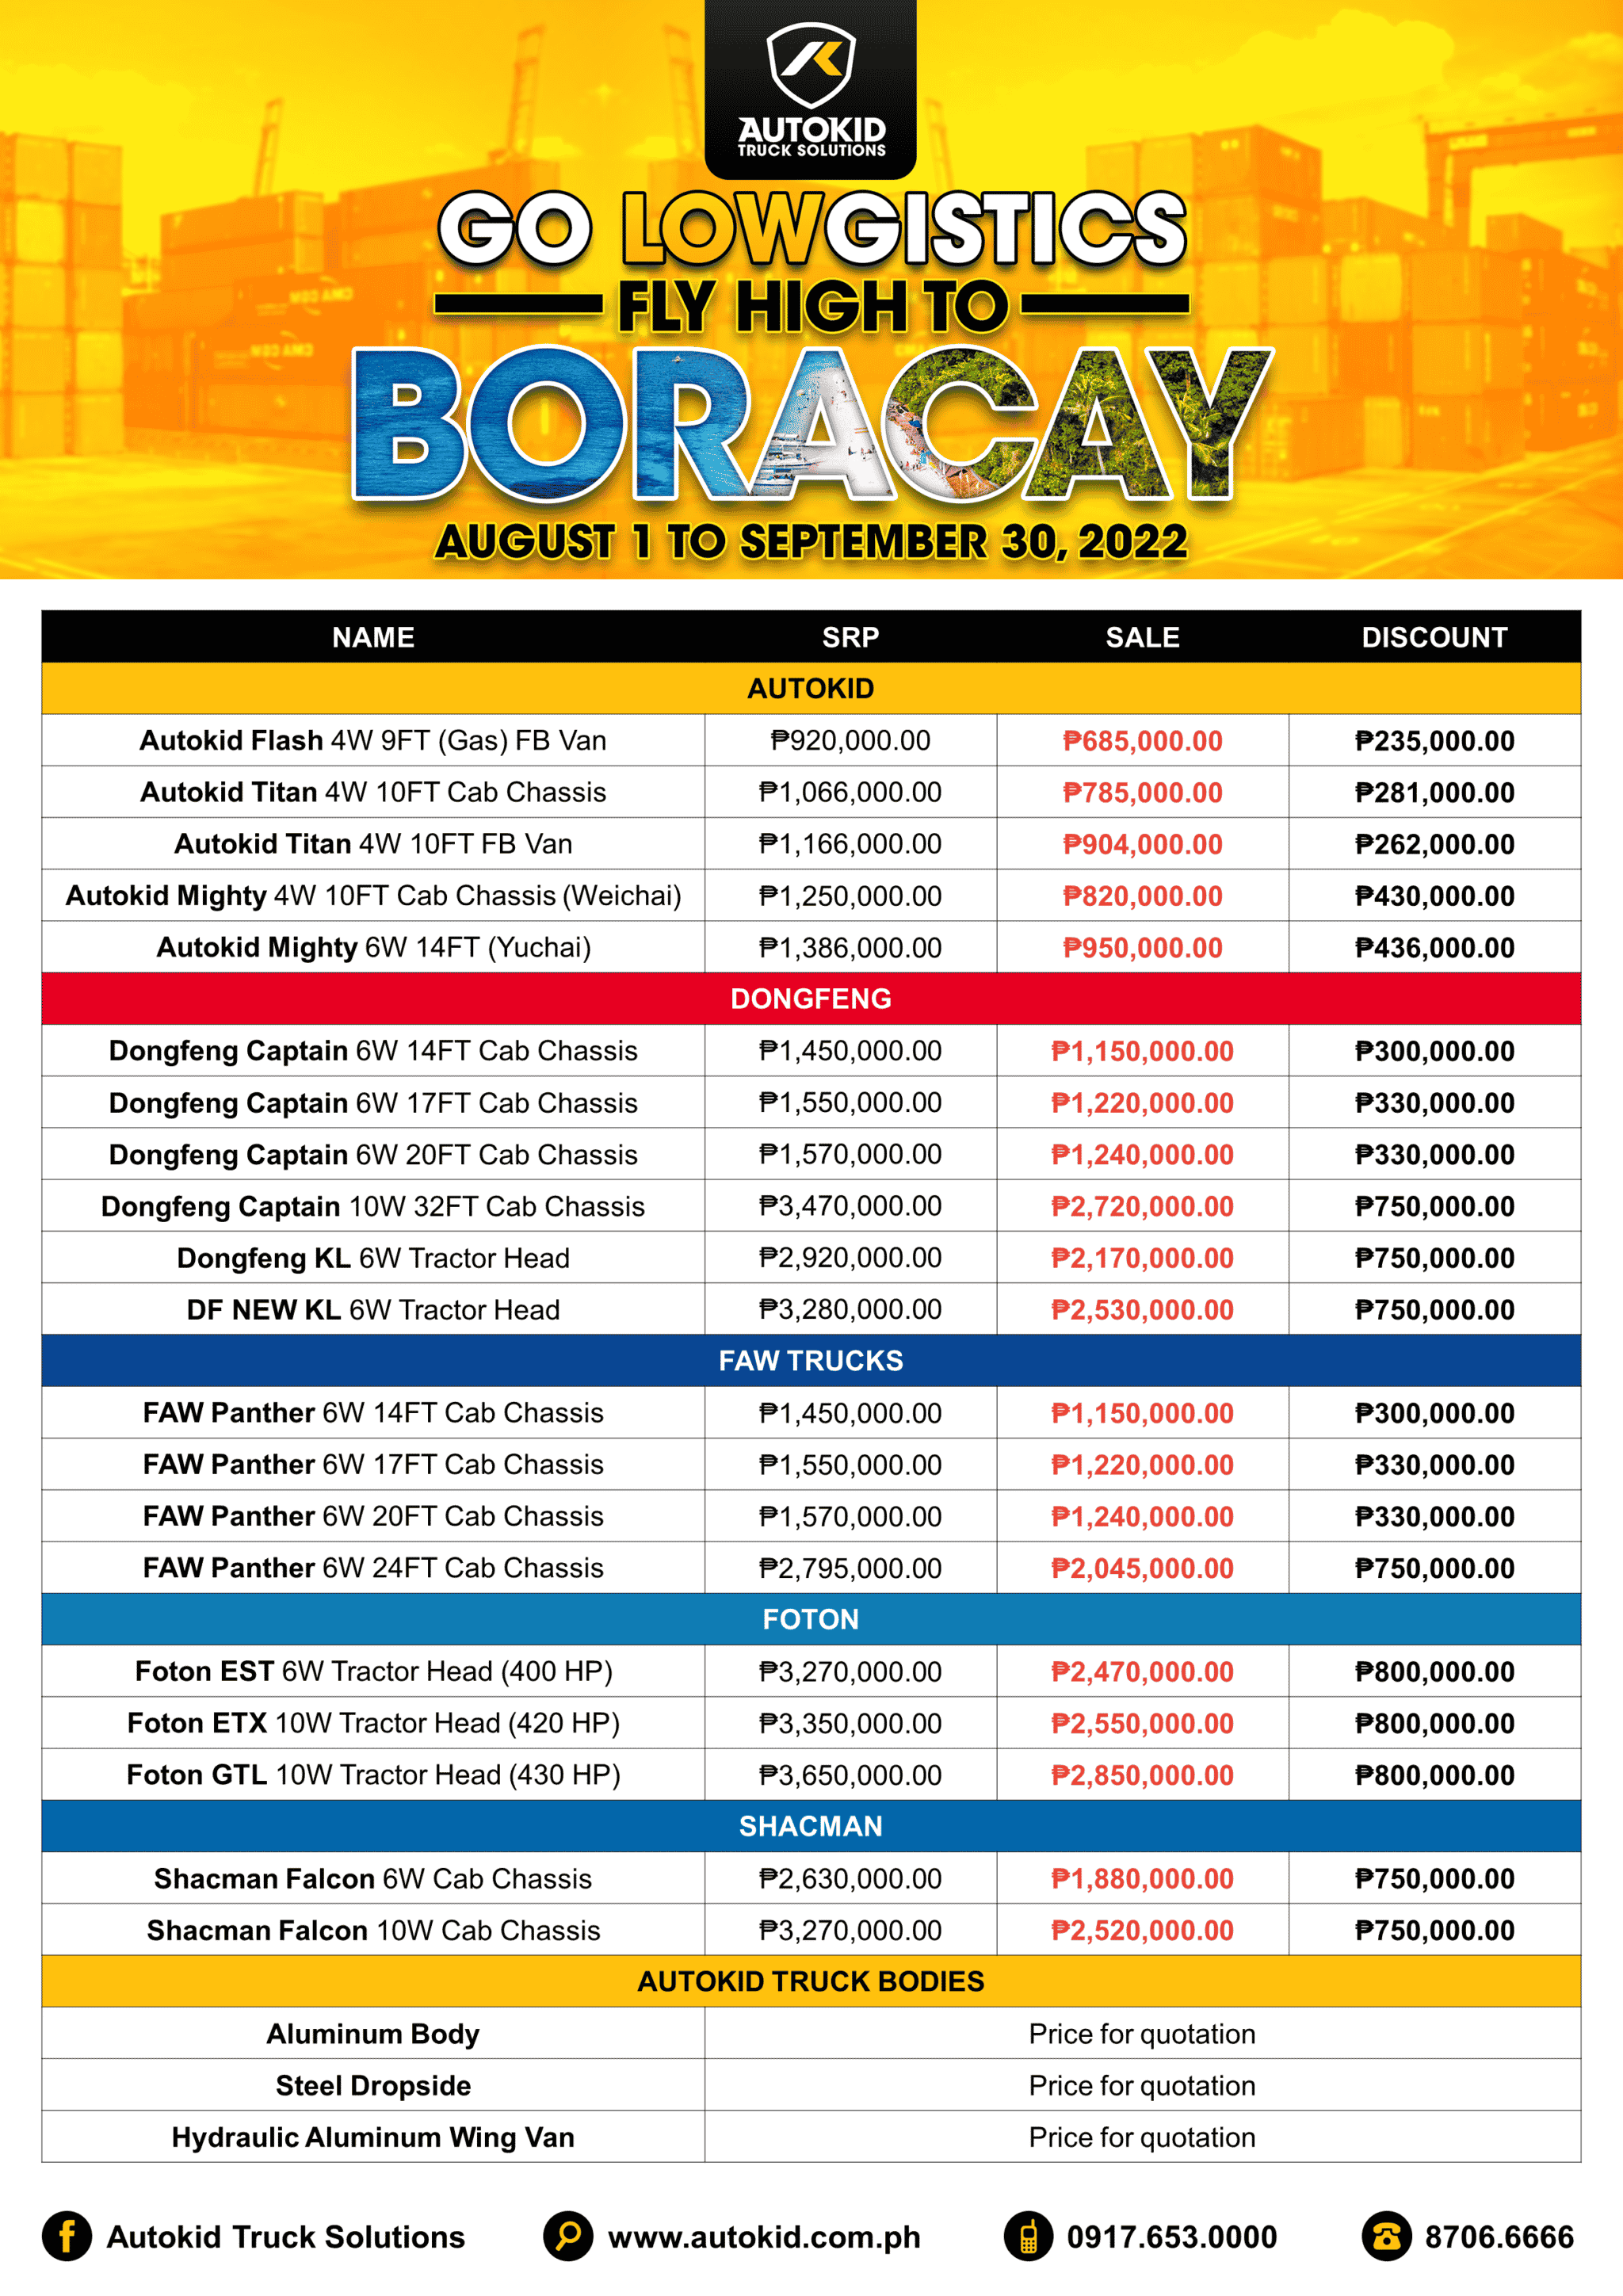 Get as much as P800k off logistics trucks and win a trip to Boracay in Autokid's Go LOWgistics, Fly High to Boracay promo.